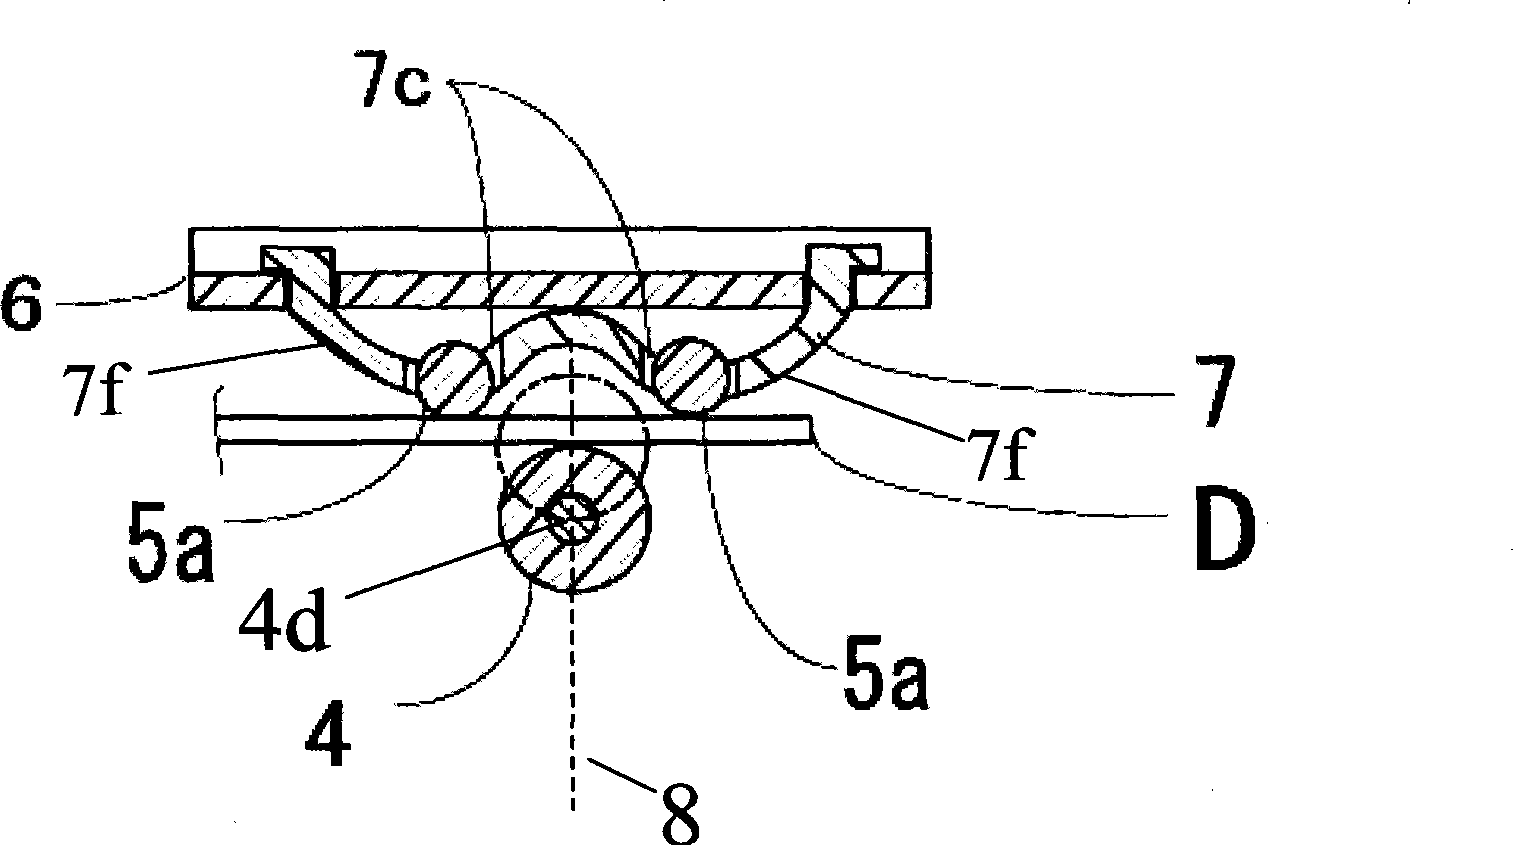 Optical disk conveying device